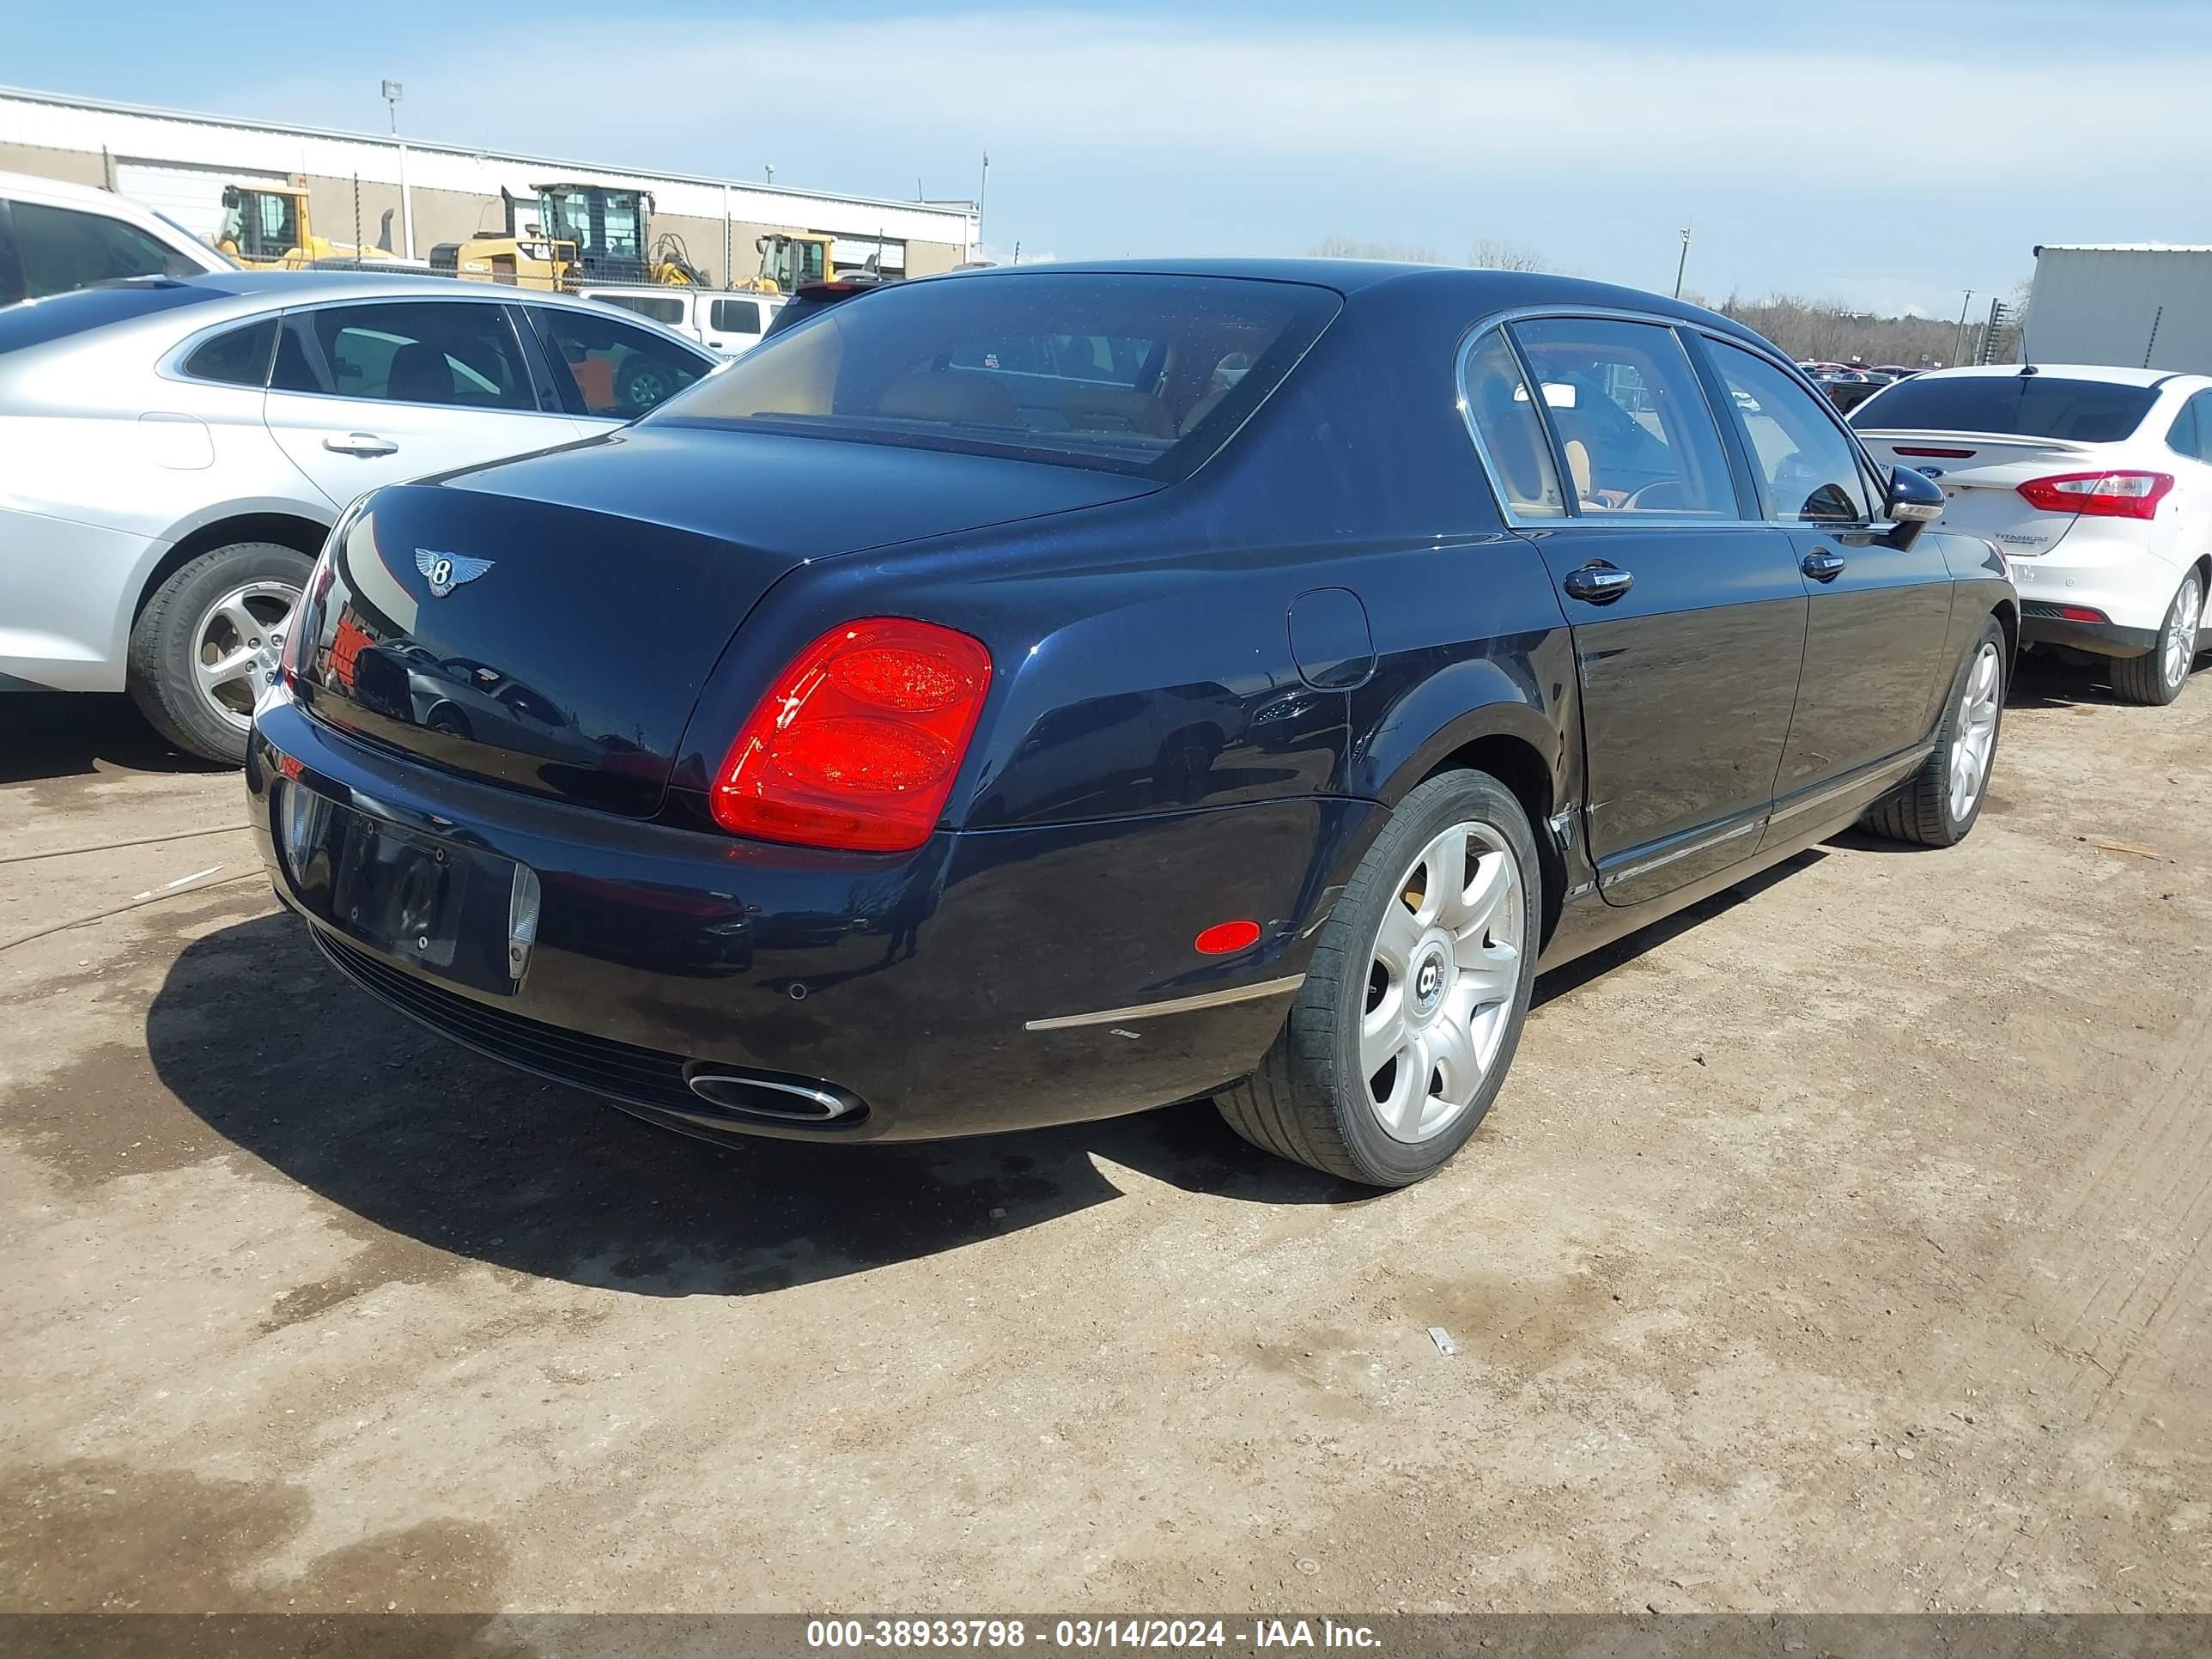 Photo 3 VIN: SCBBR53W46C034805 - BENTLEY CONTINENTAL FLYING SPUR 